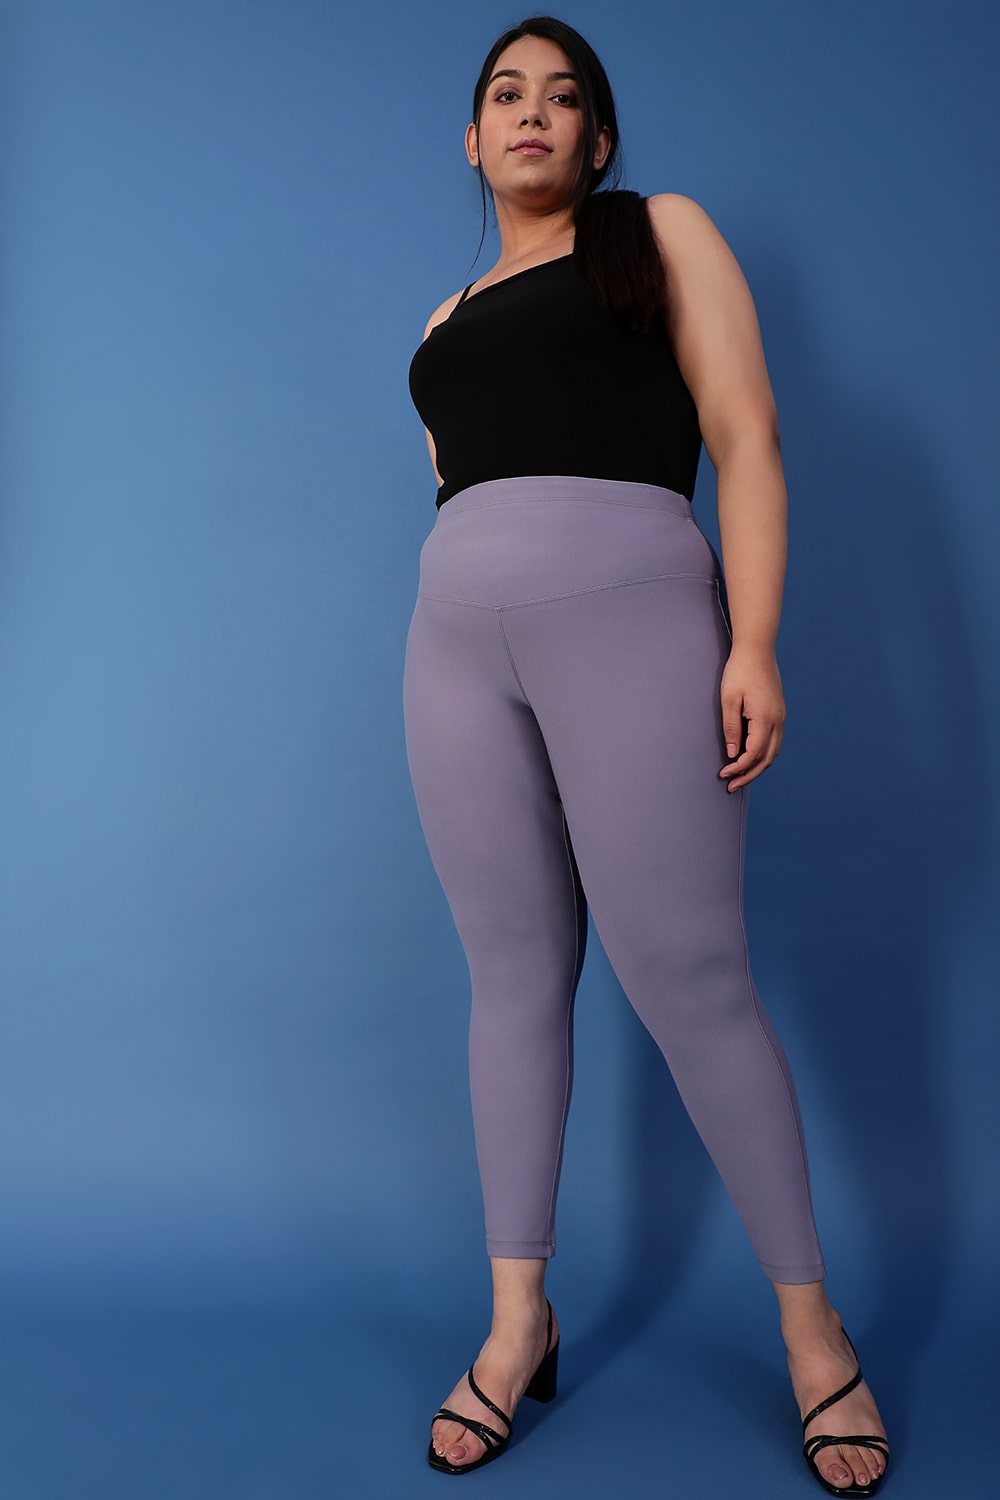 Pin on Gym Outfits for Women Plus Size